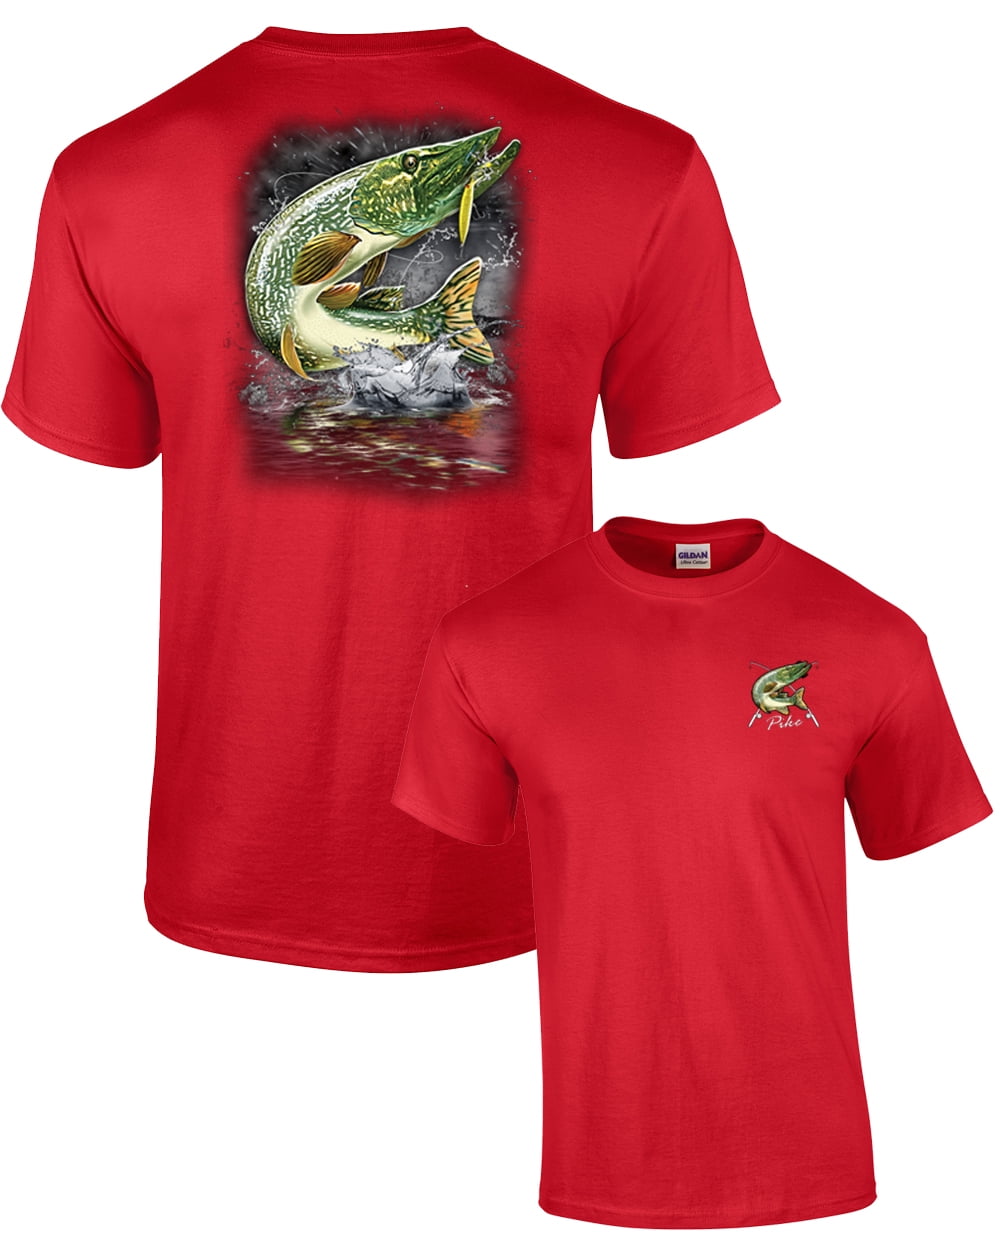 Fishing T-Shirt Pike Jumping After Lure 2 Sides, Size: Xxxl, Red